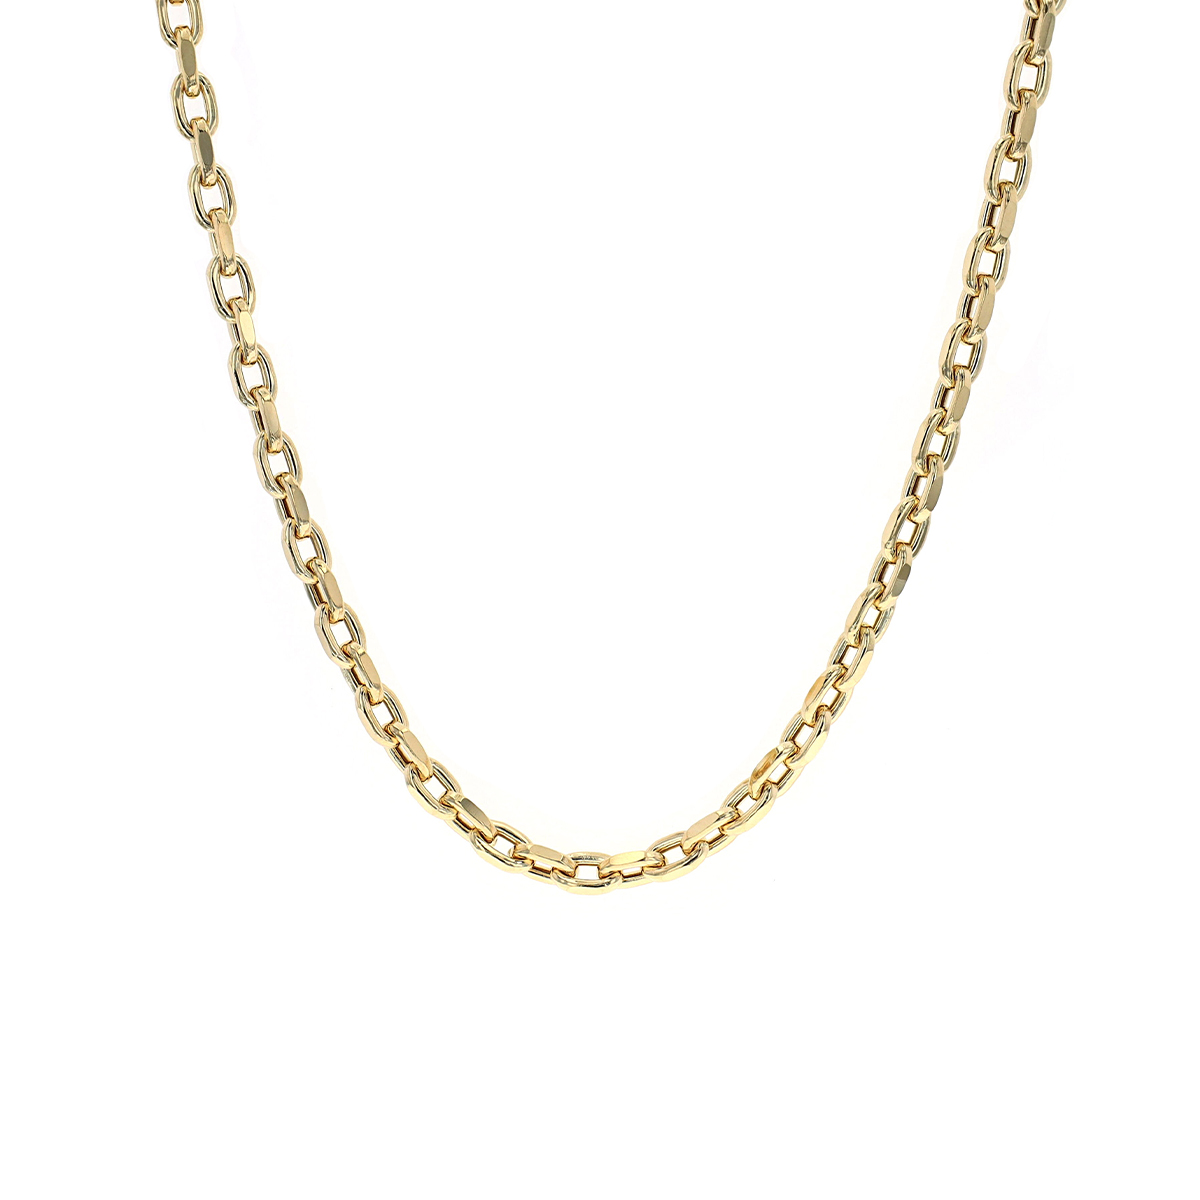 14K Yellow Gold 24-Inch Diamond Cut Cable Chain.